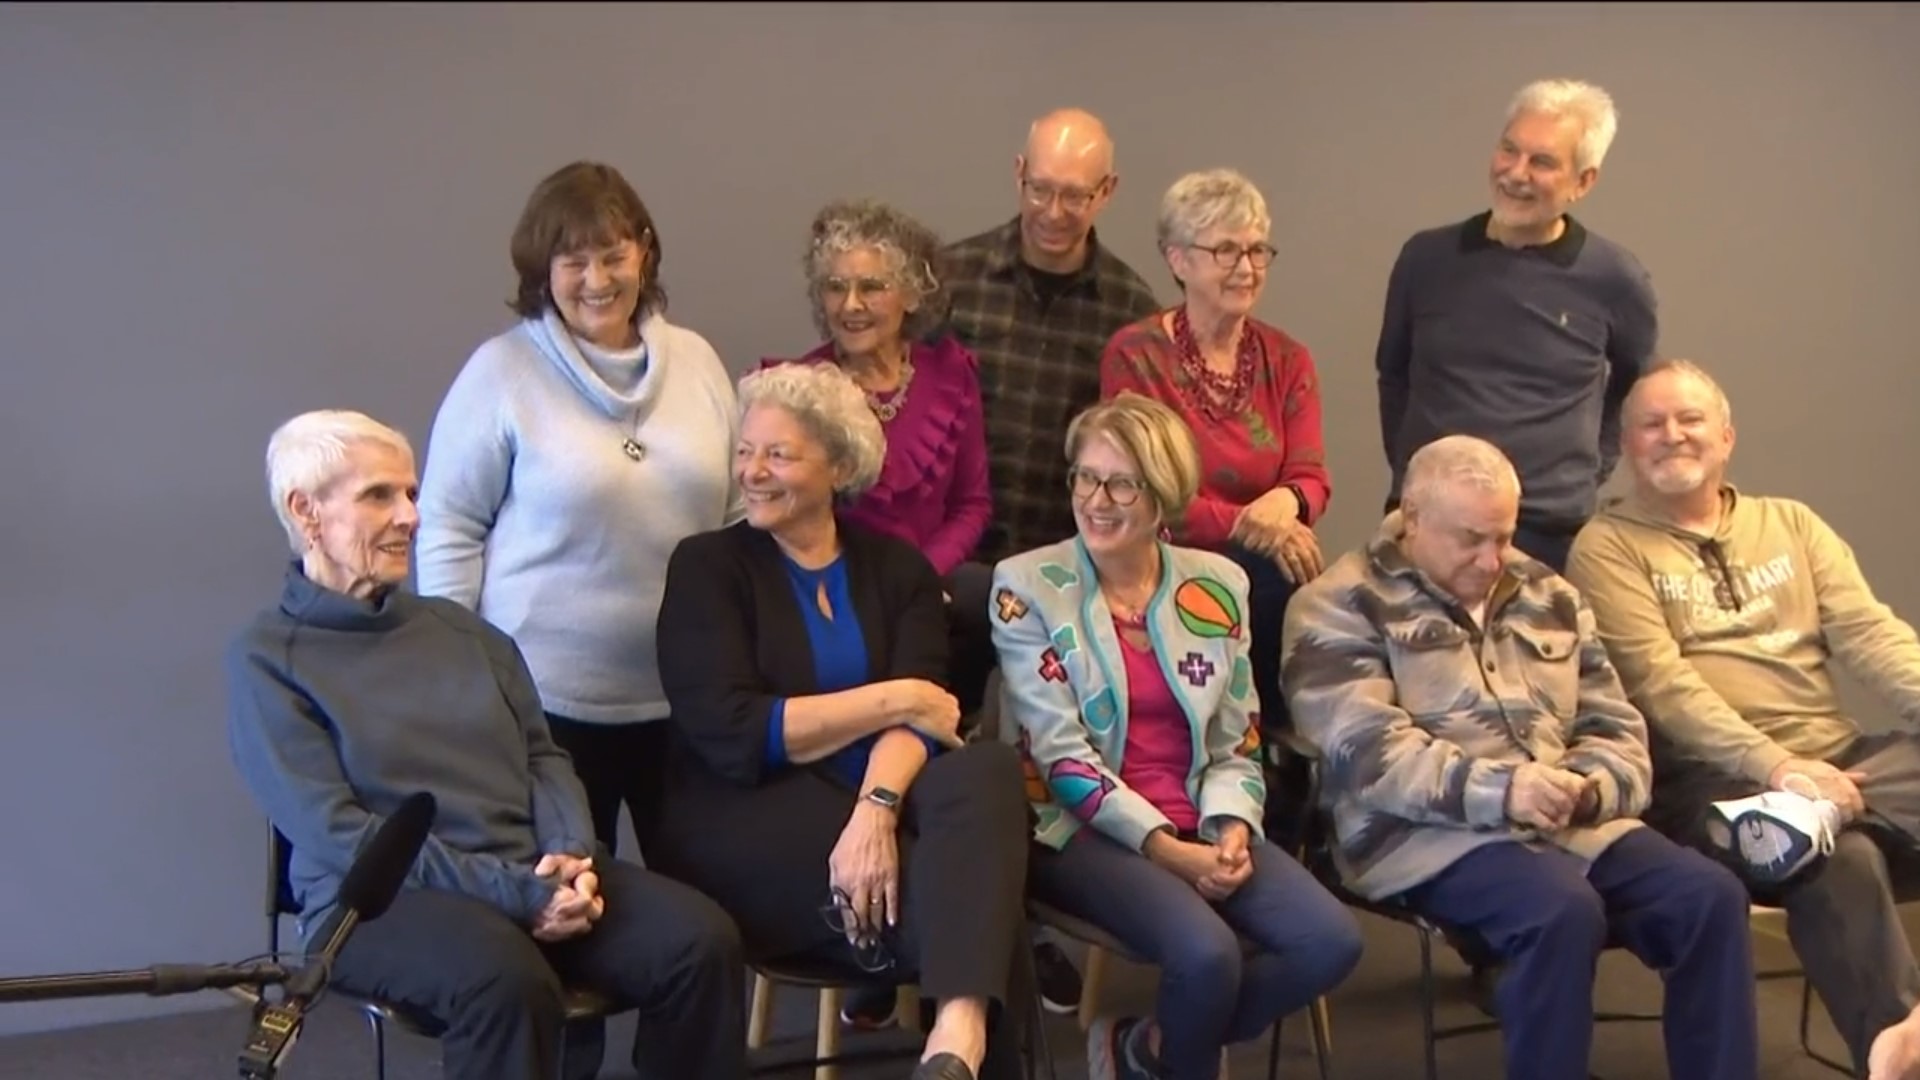 Seniors in San Diego are taking center stage in an improv class called Active Minds, where they challenge themselves to think quickly and creatively.